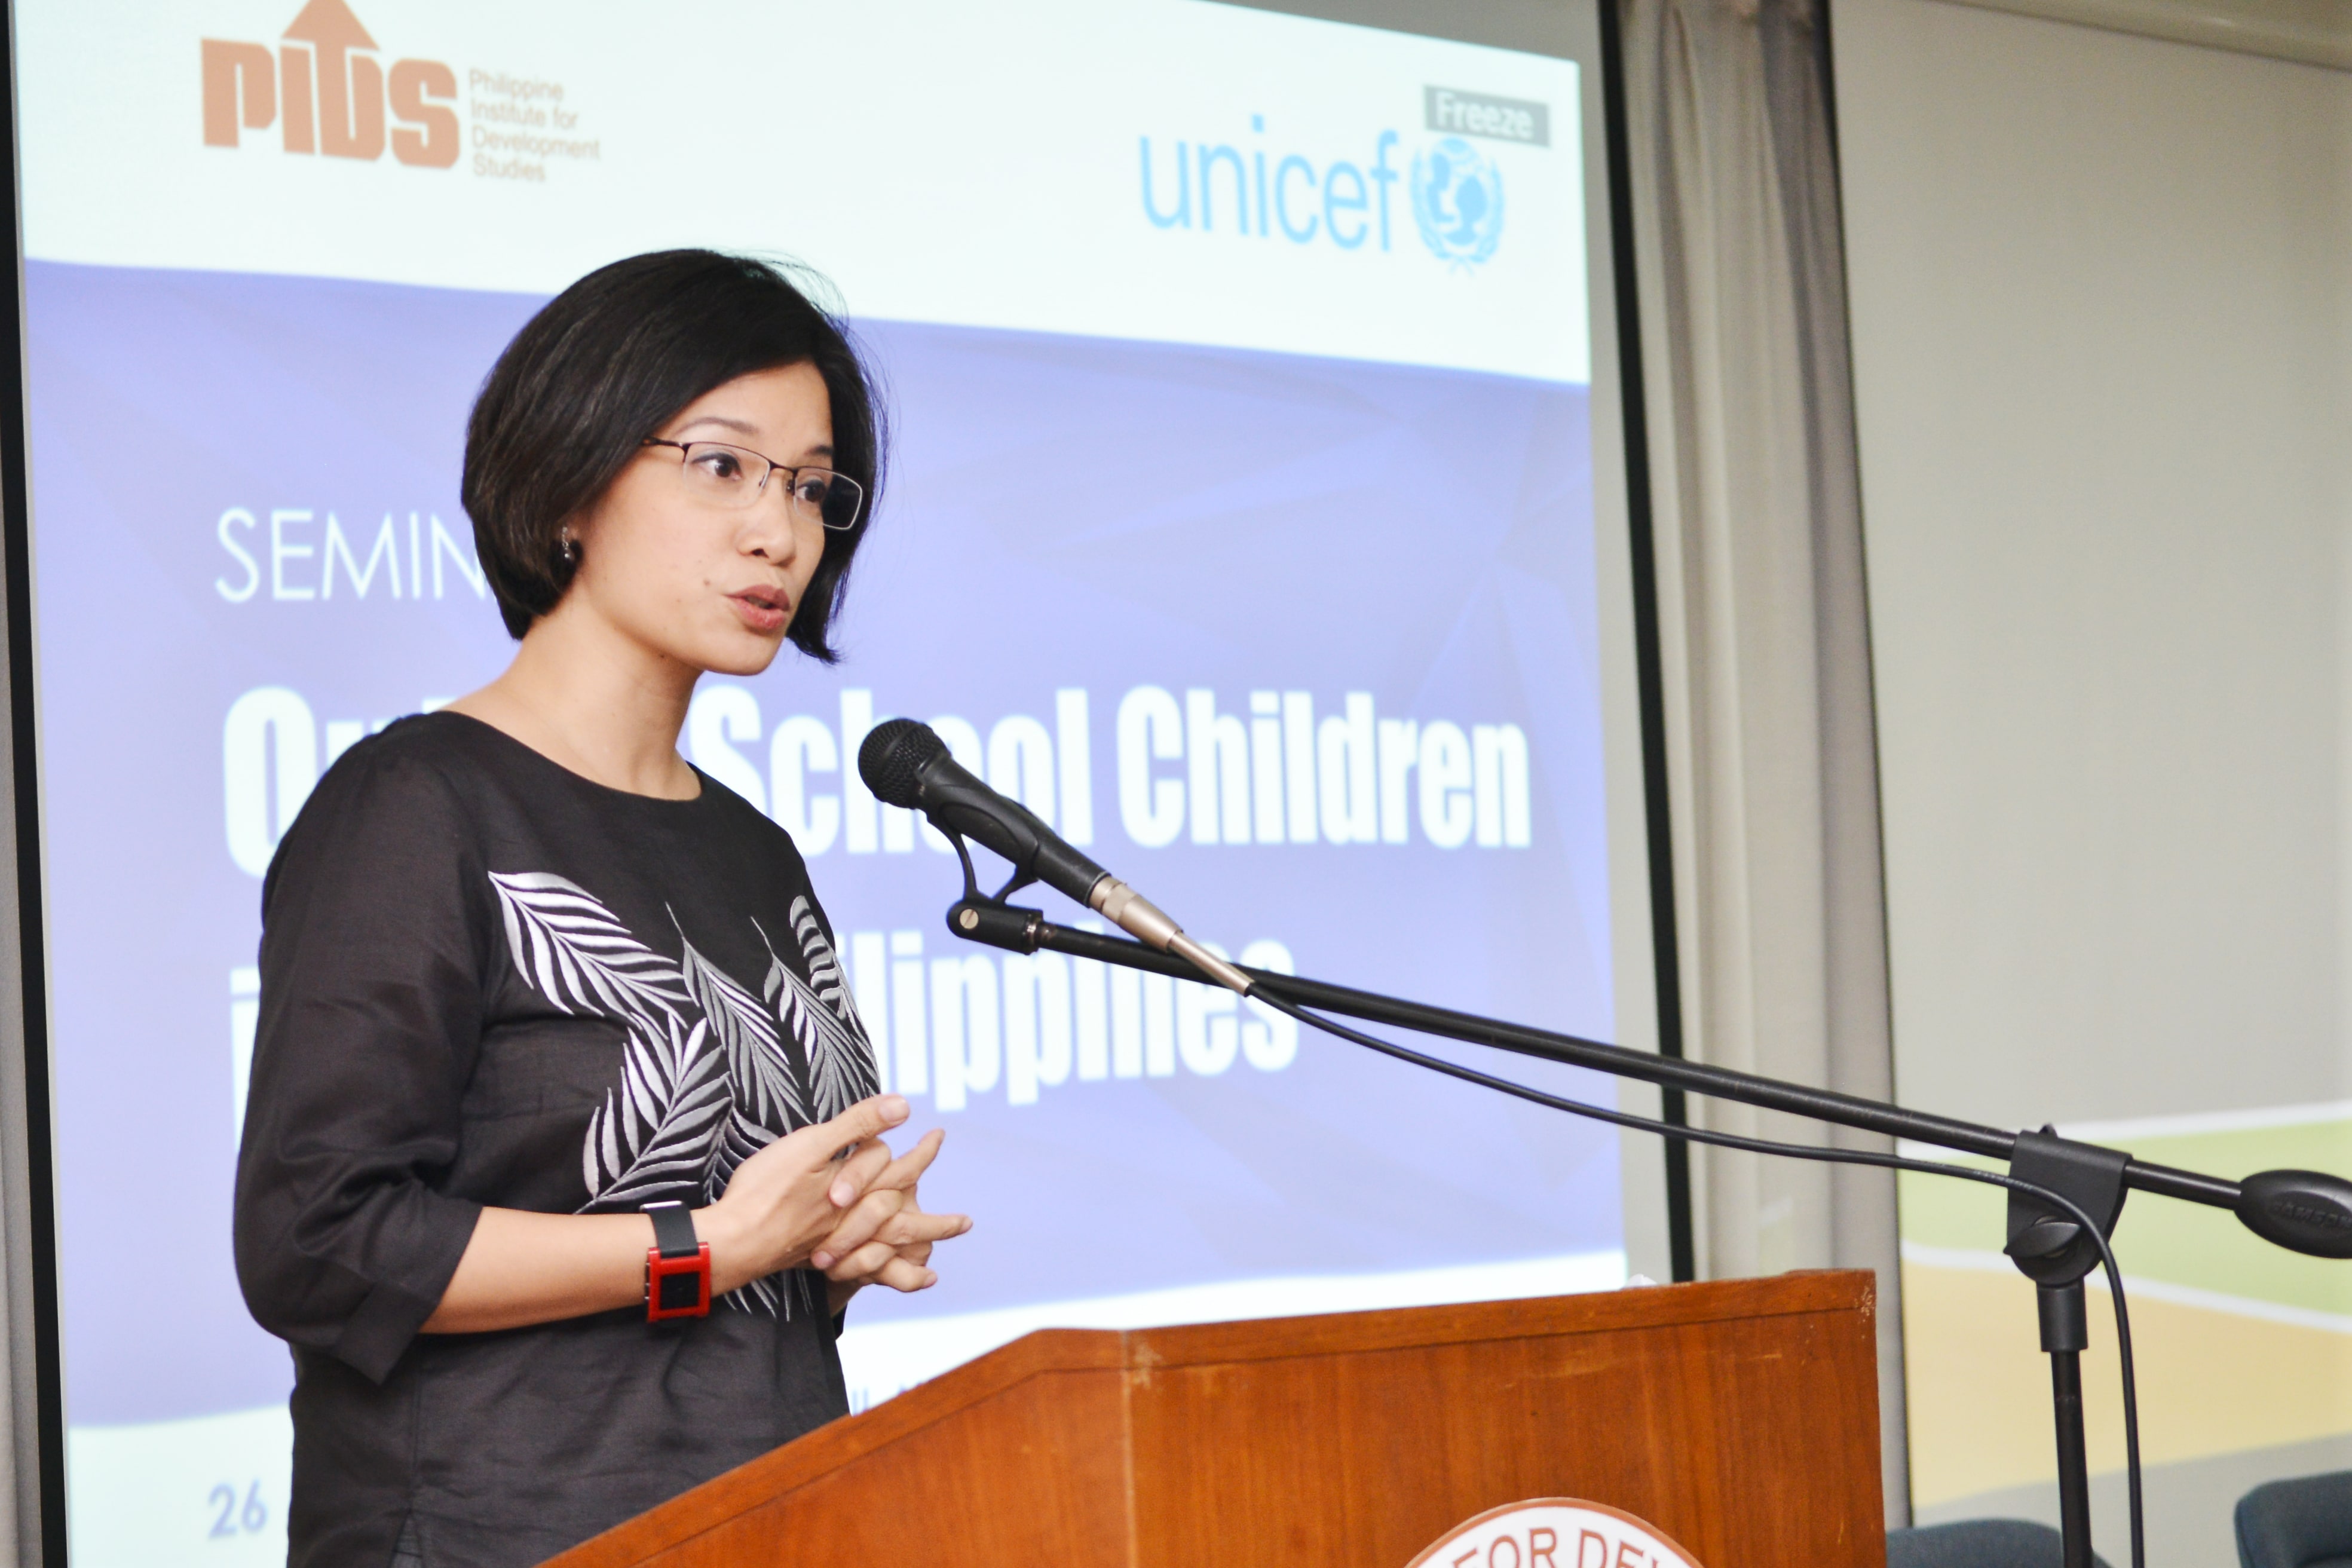 Seminar On Out-Of-School Children (OOSC) In The Philippines-DSC_3128.jpg